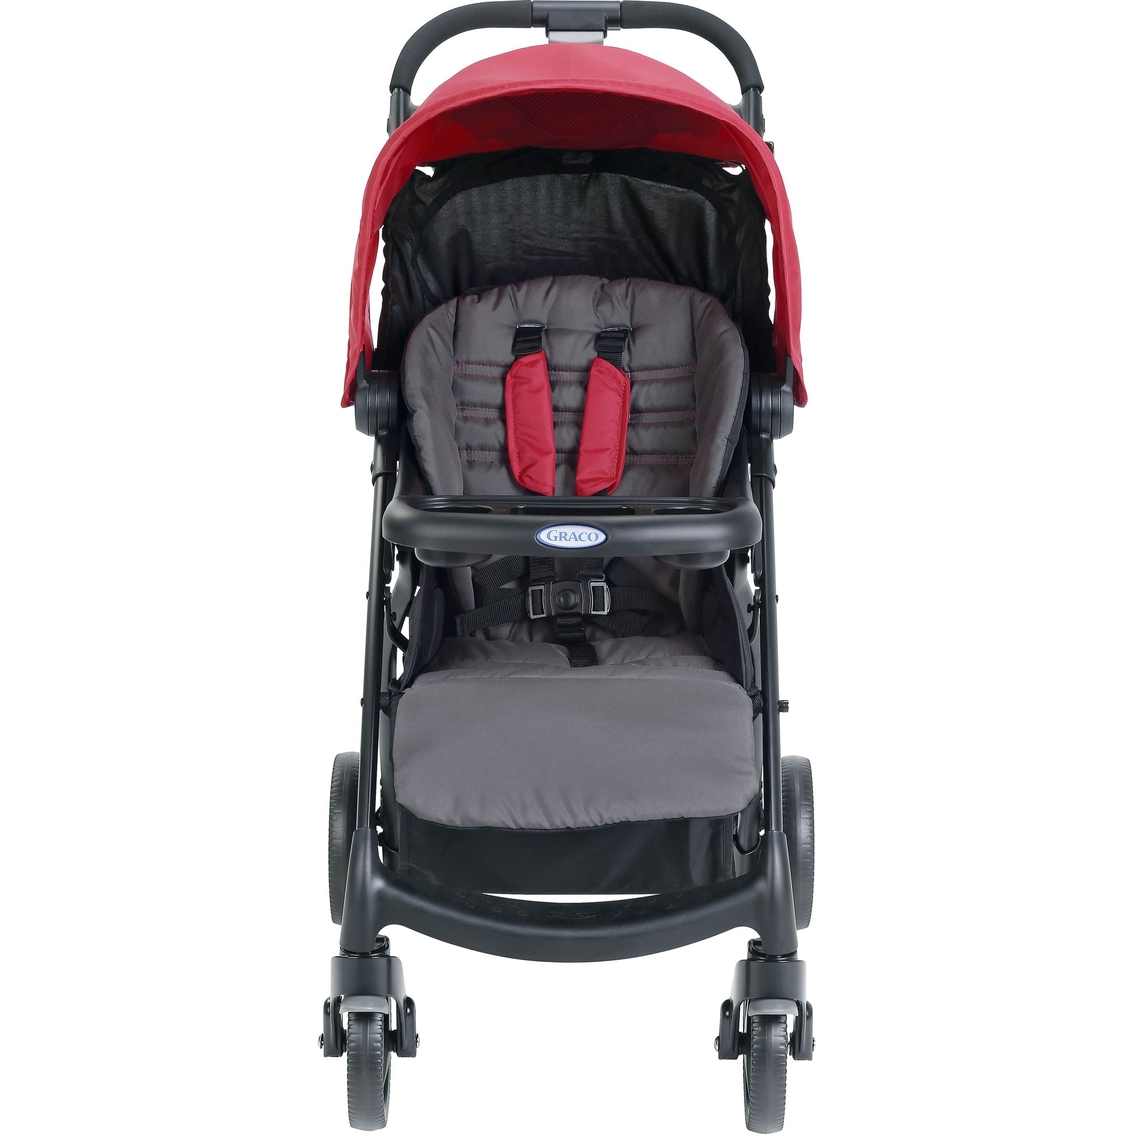 Graco Verb Click Connect Stroller - Image 2 of 2